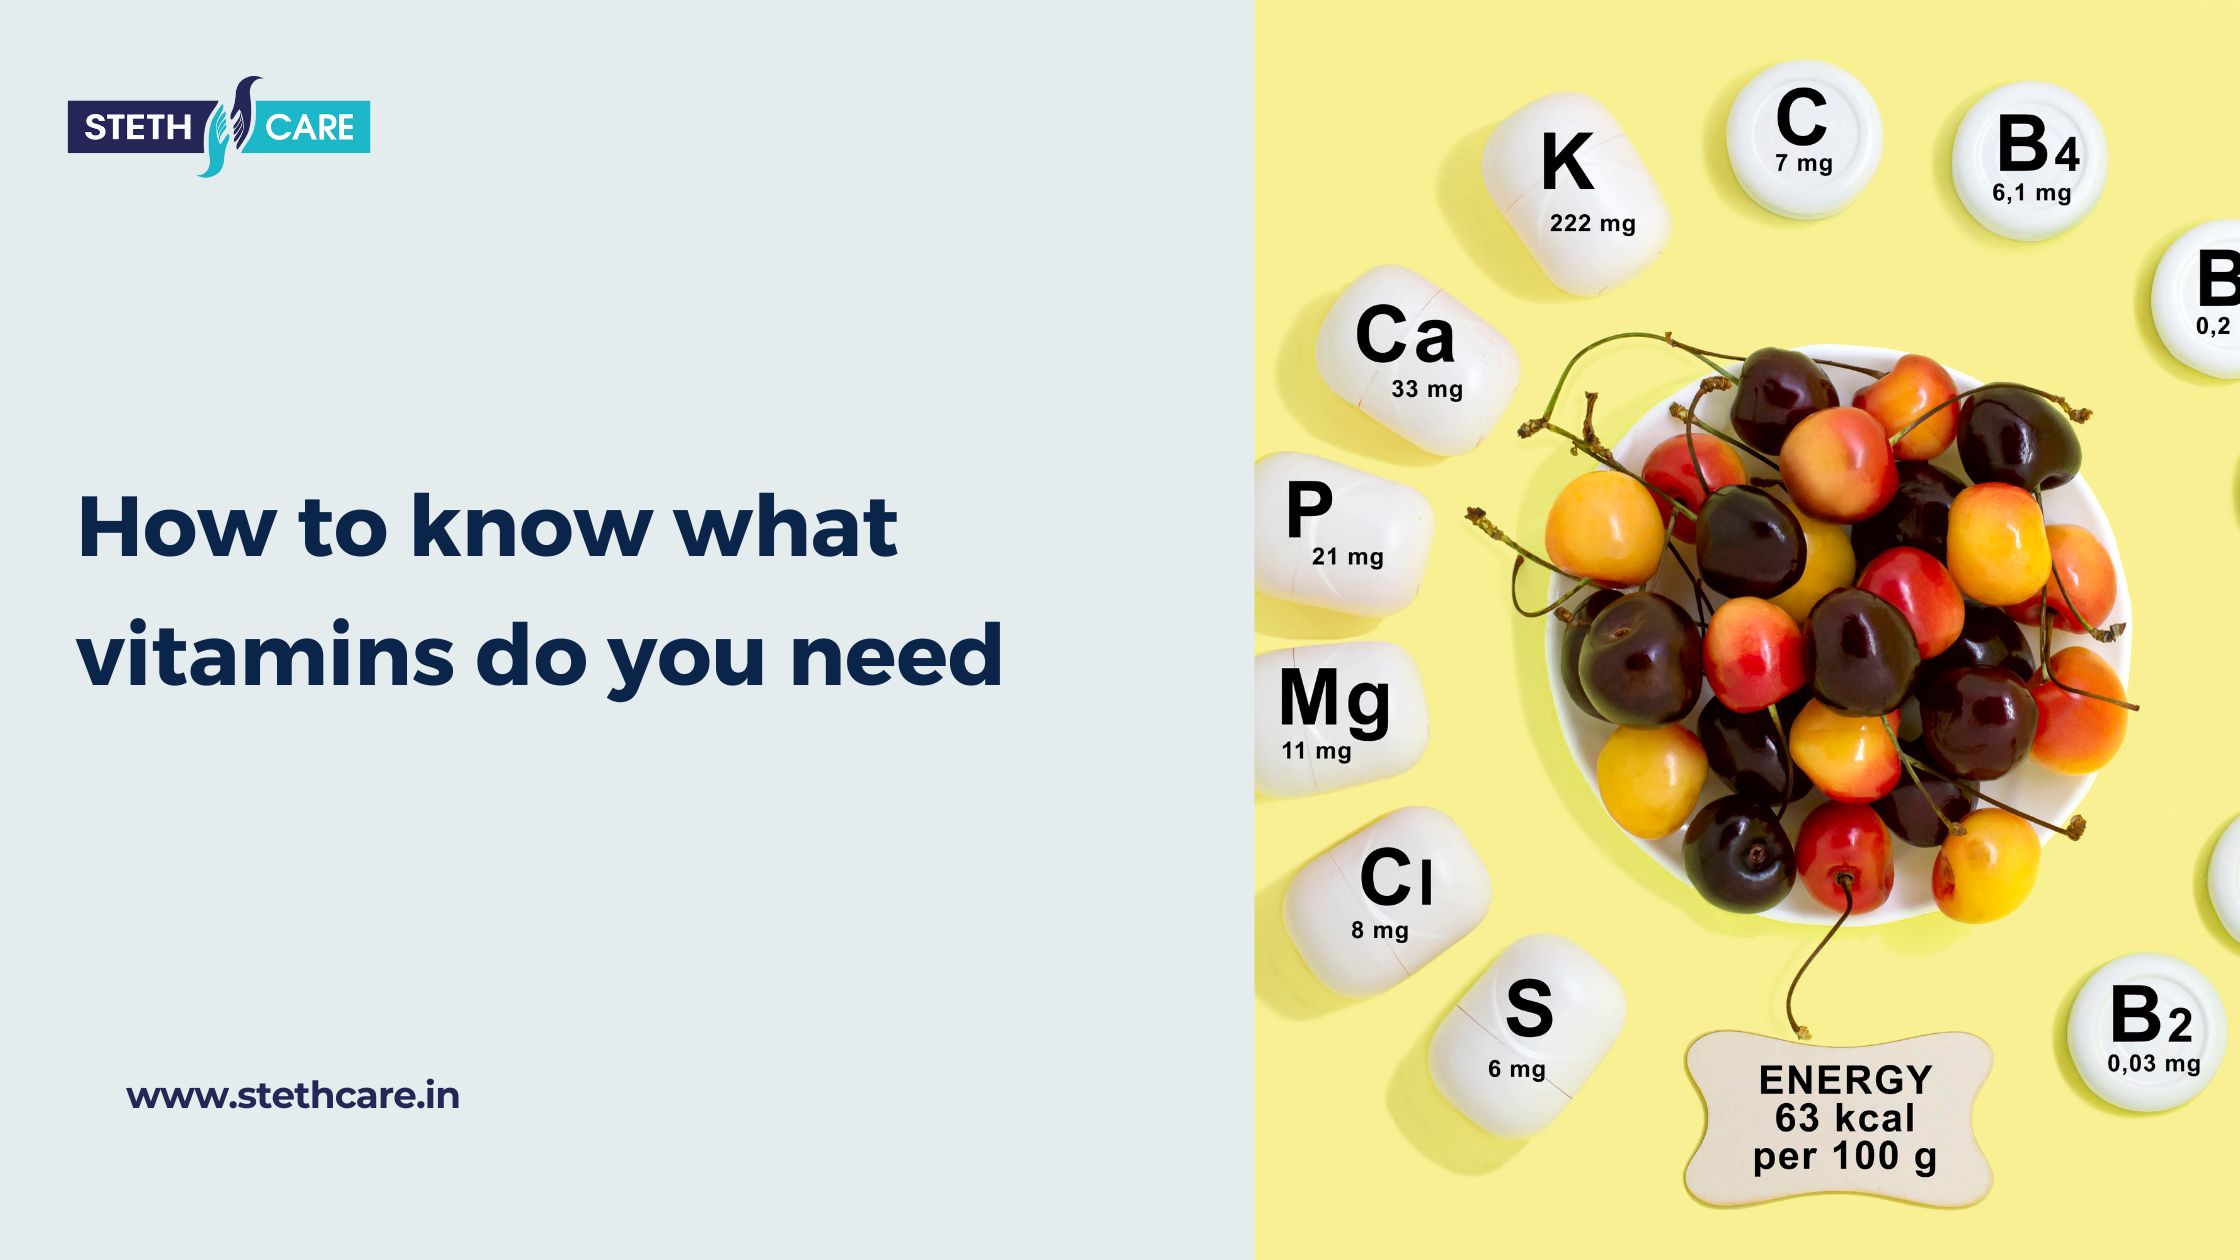 How to know what vitamins do you need